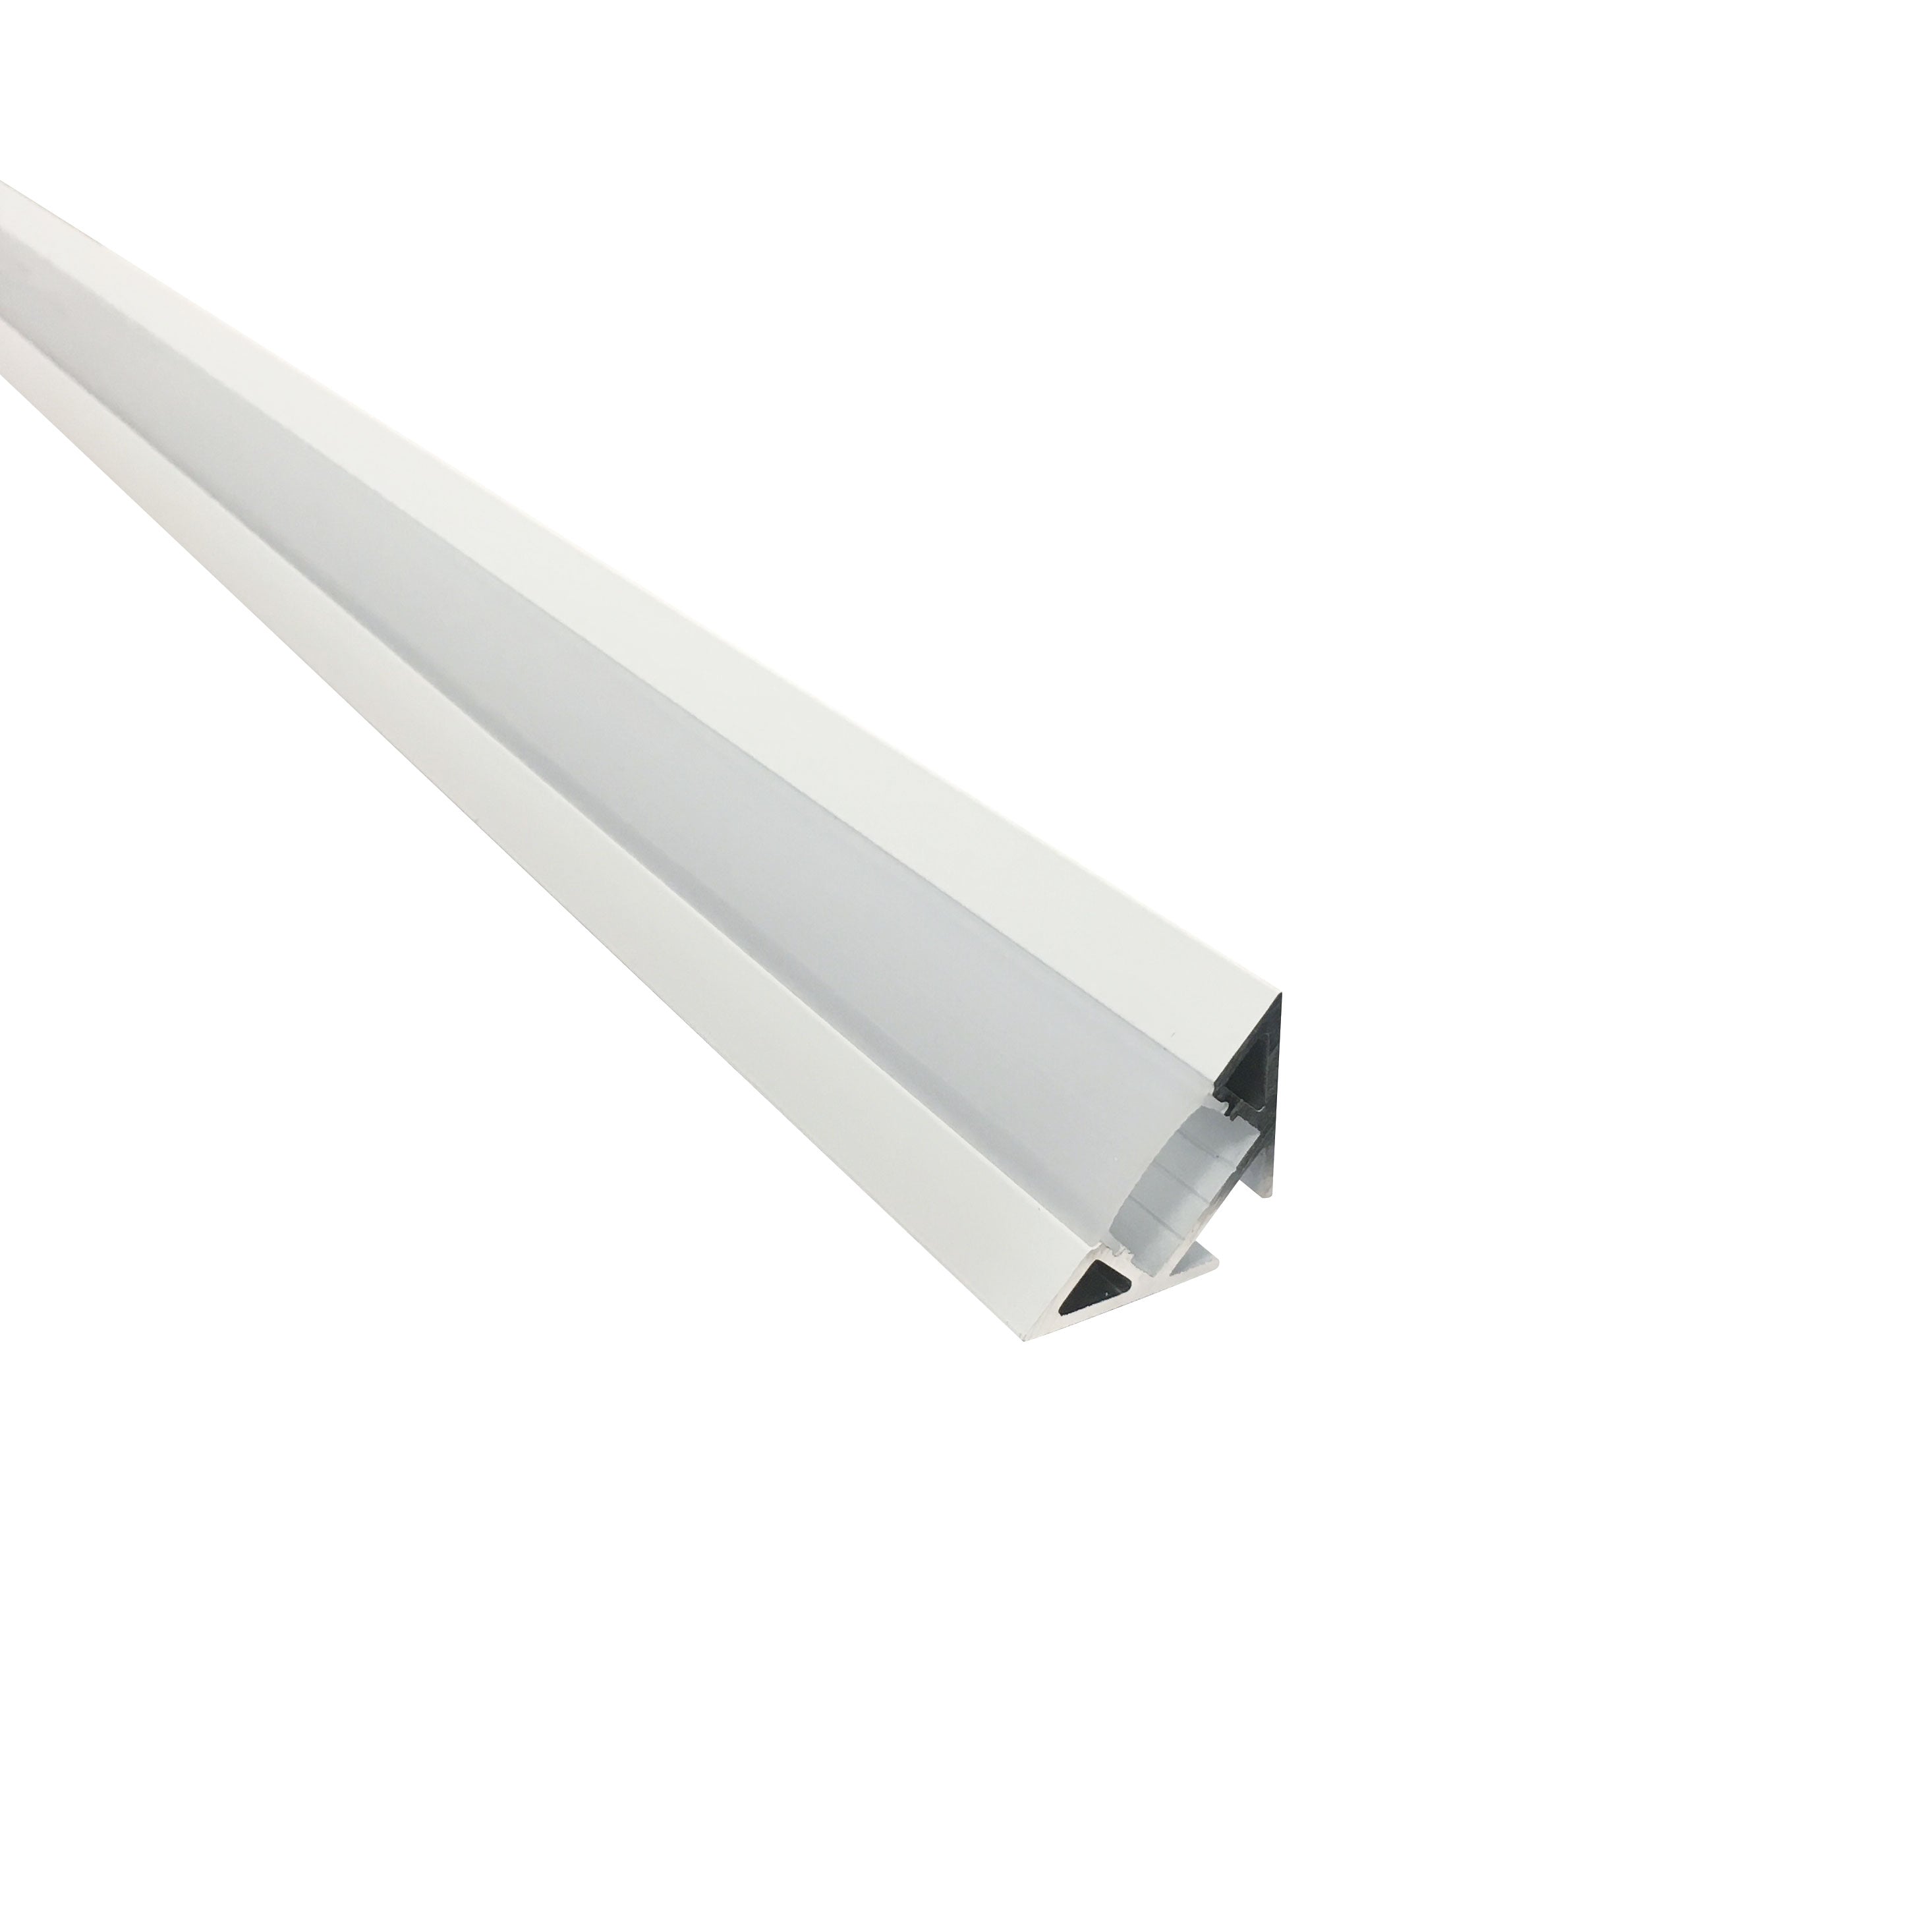 Nora Lighting NATL-C28W 4-ft Corner Channel (Plastic Diffuser and End Caps Included) - White